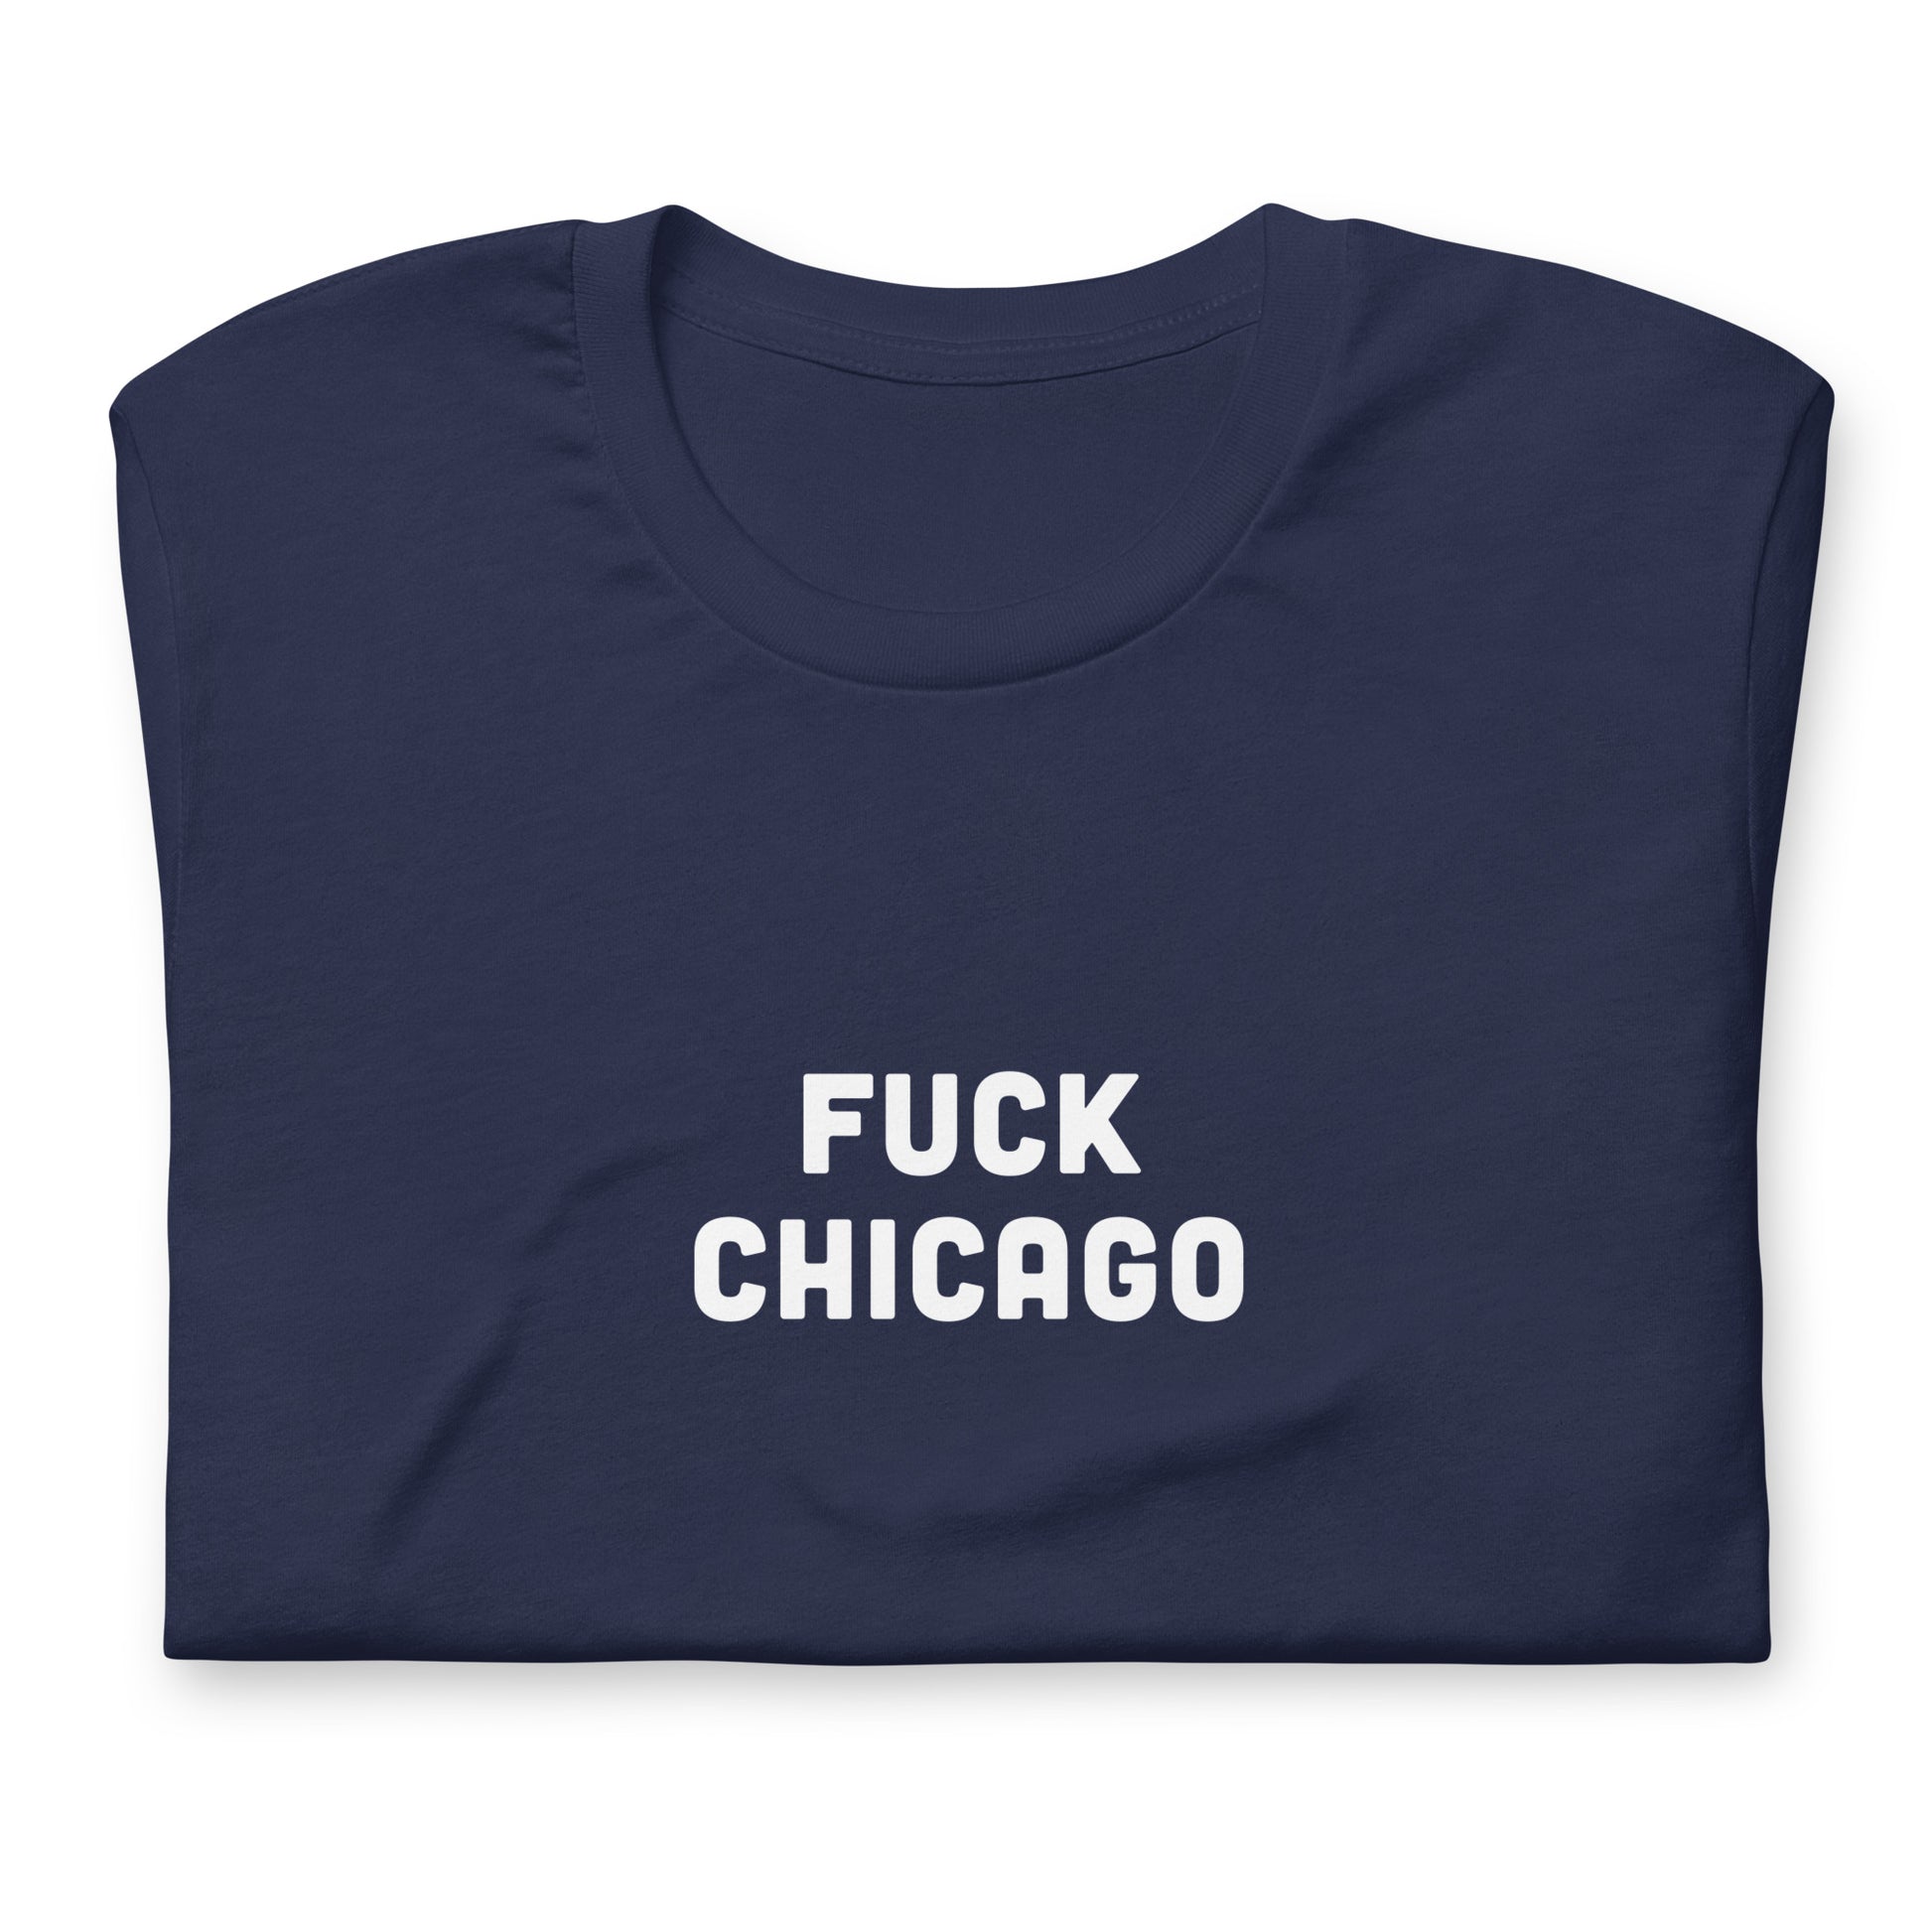 Fuck Chicago T-Shirt Size S Color Navy